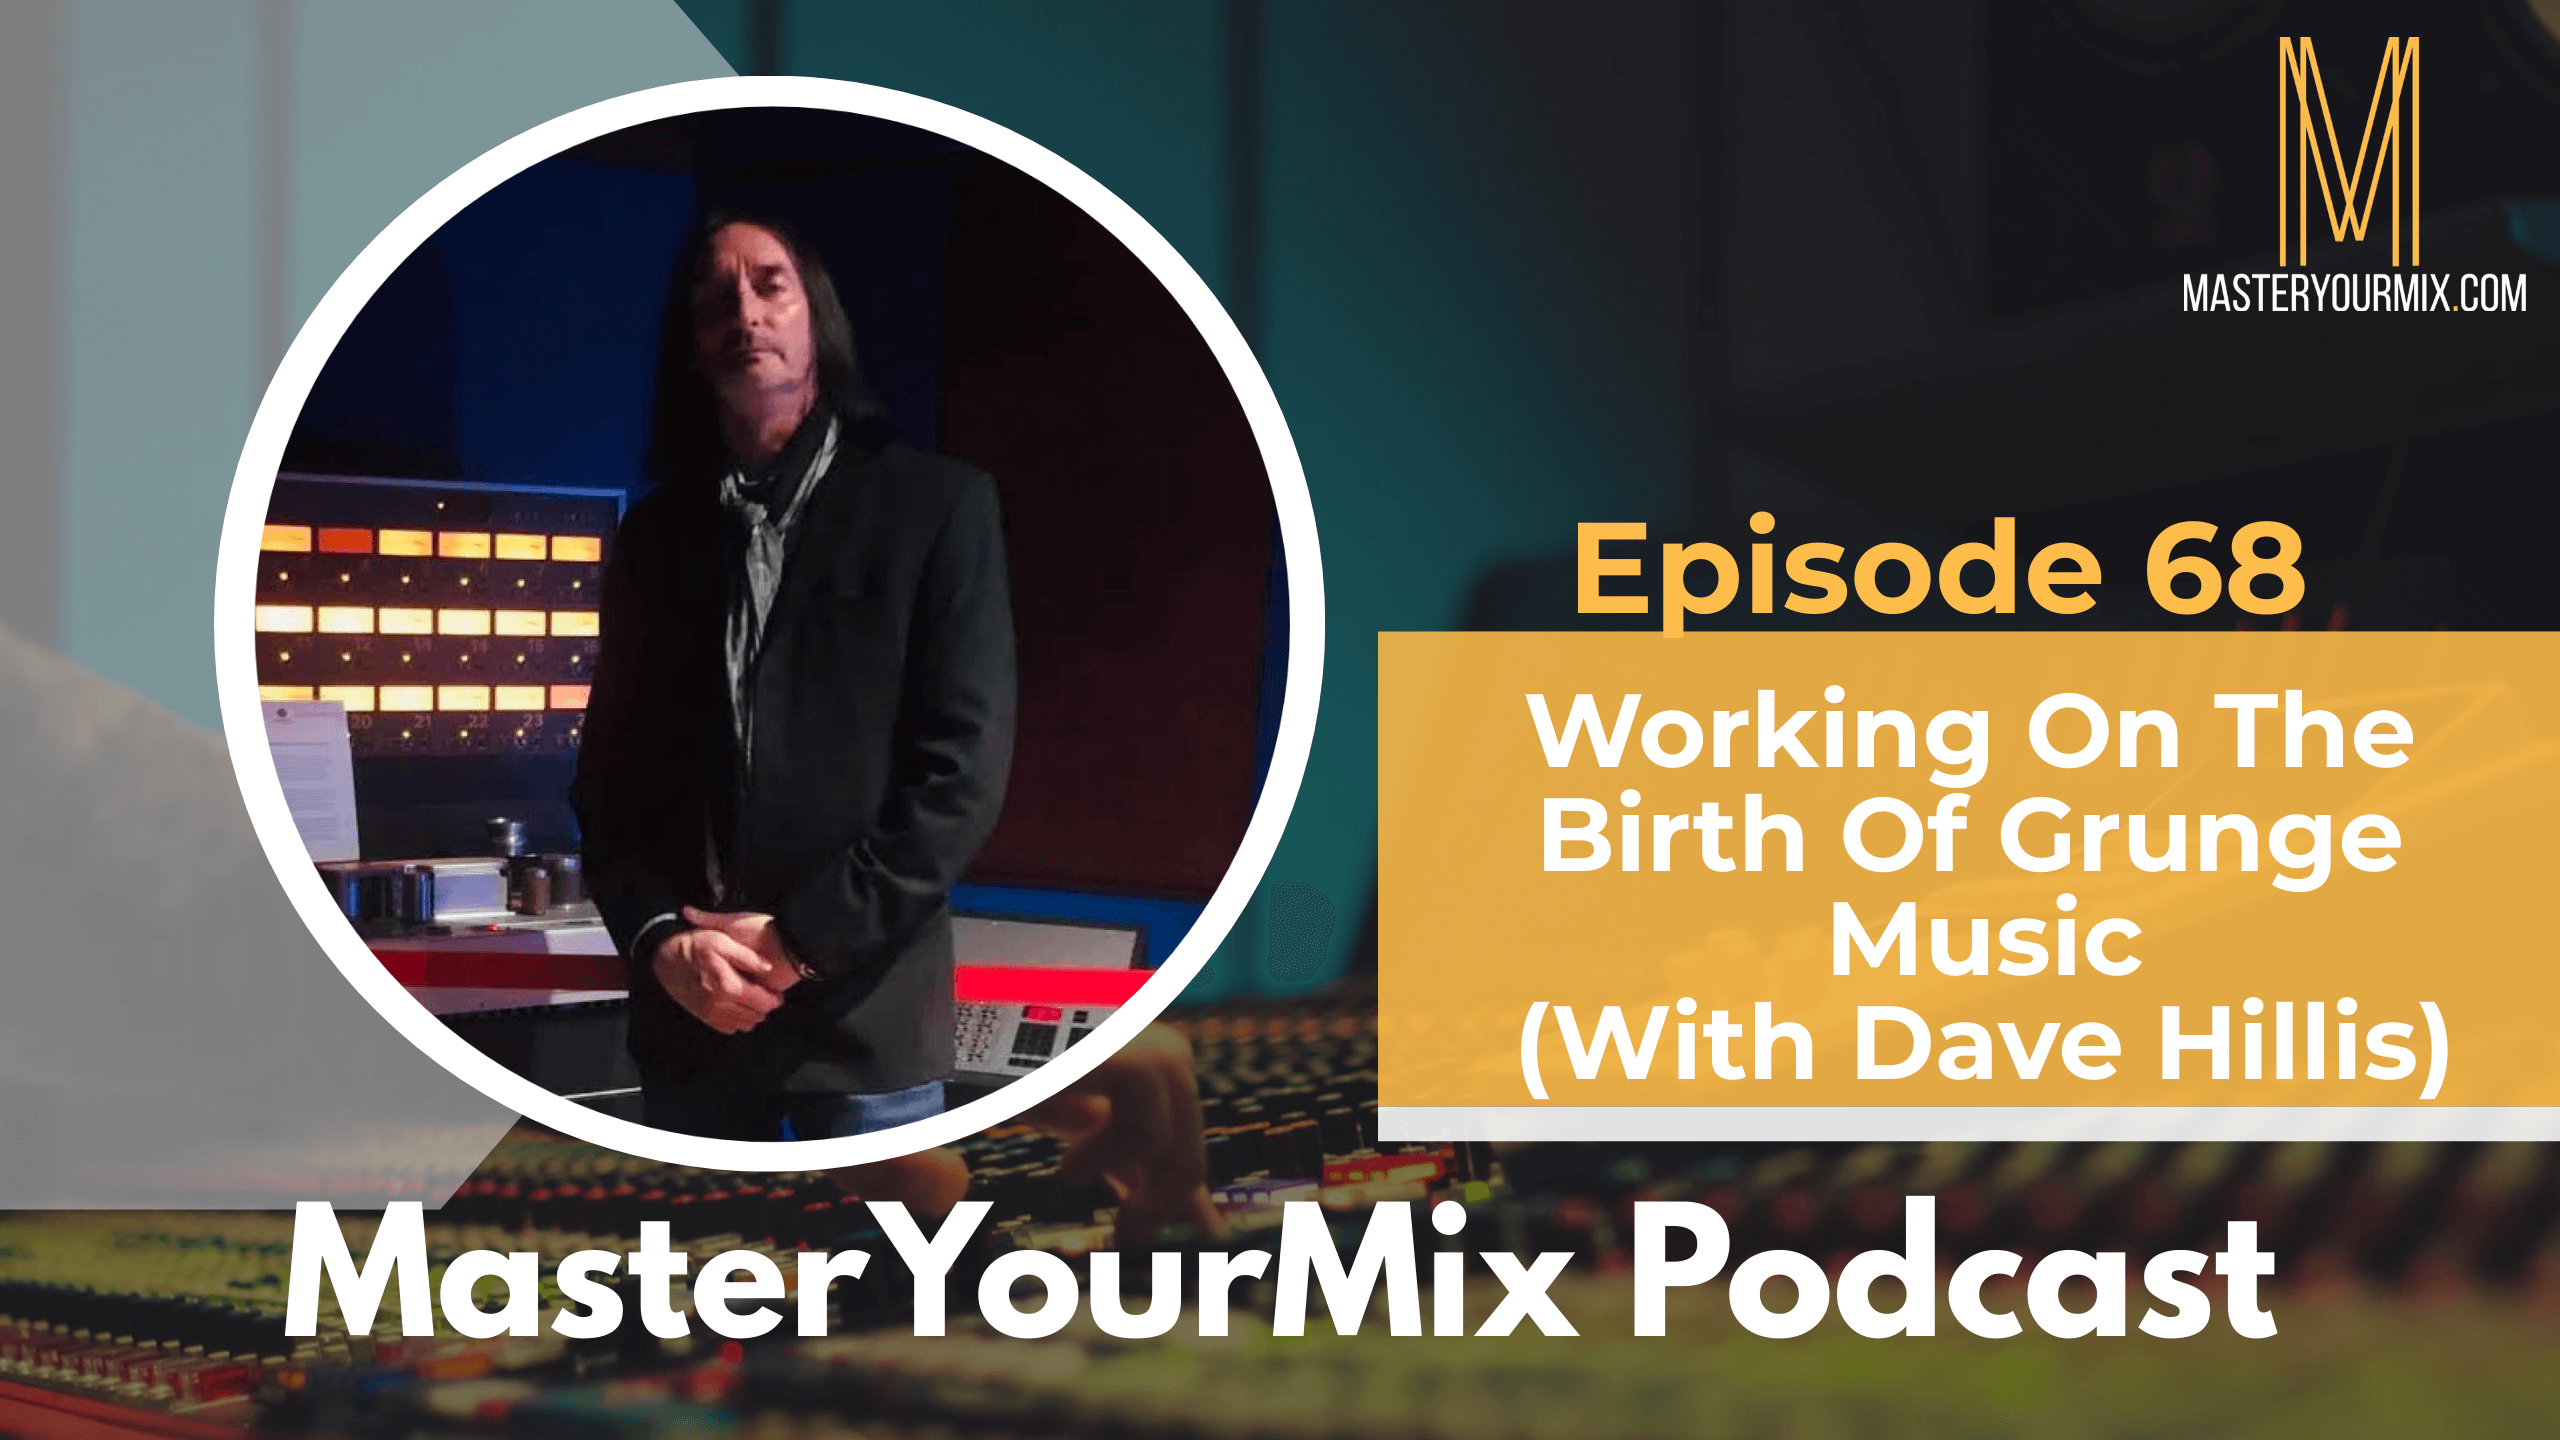 master your mix podcast, ep 68 dave hillis